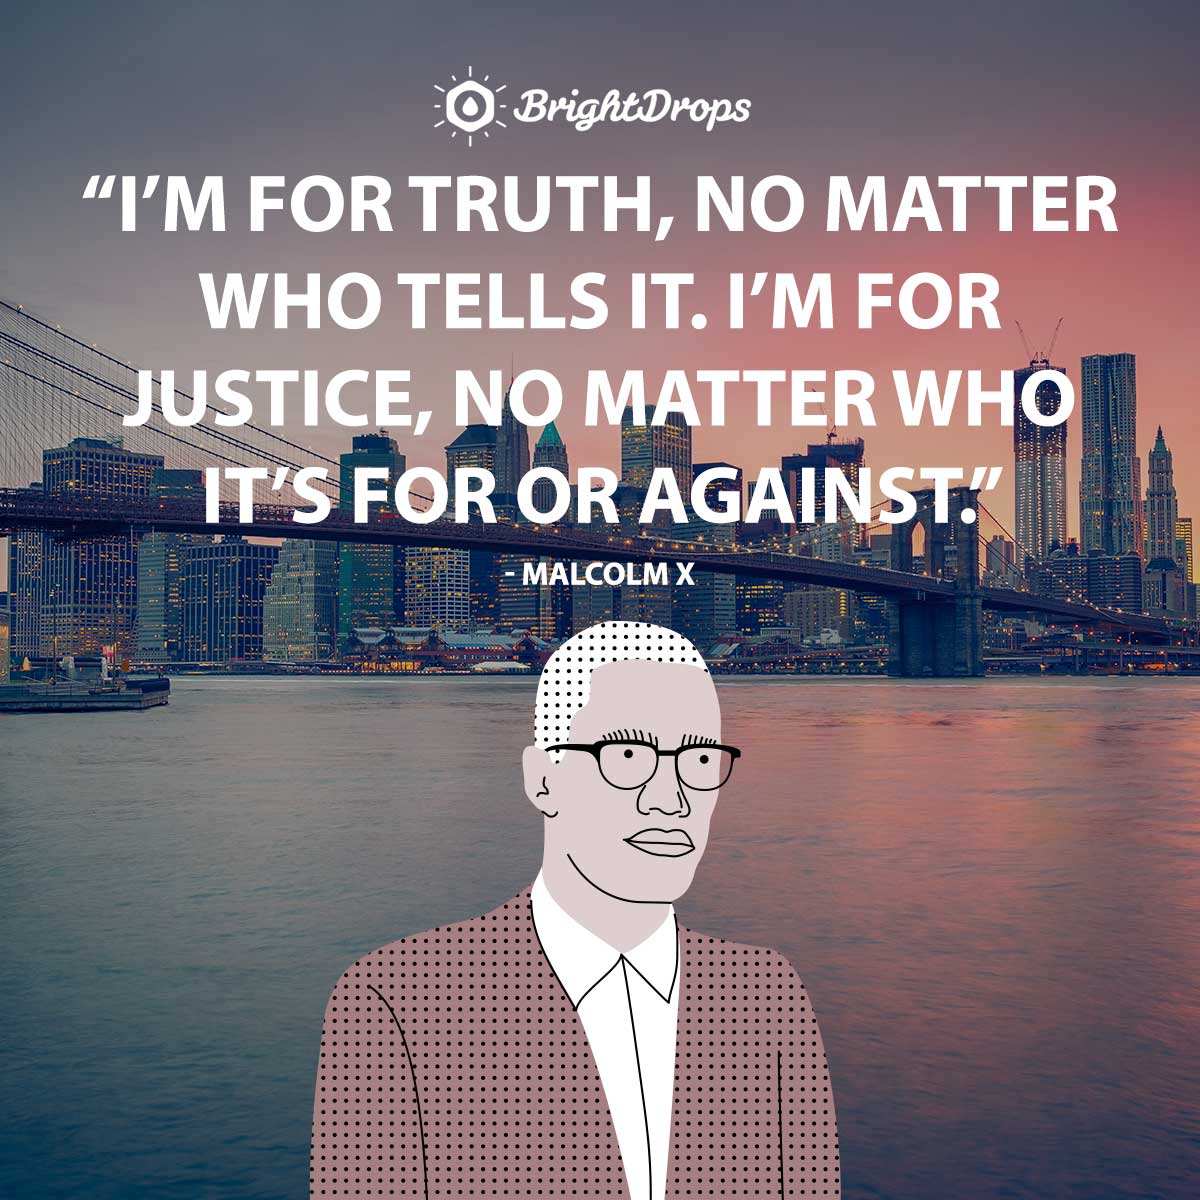 I’m for truth, no matter who tells it. I’m for justice, no matter who it’s for or against. - Malcolm X